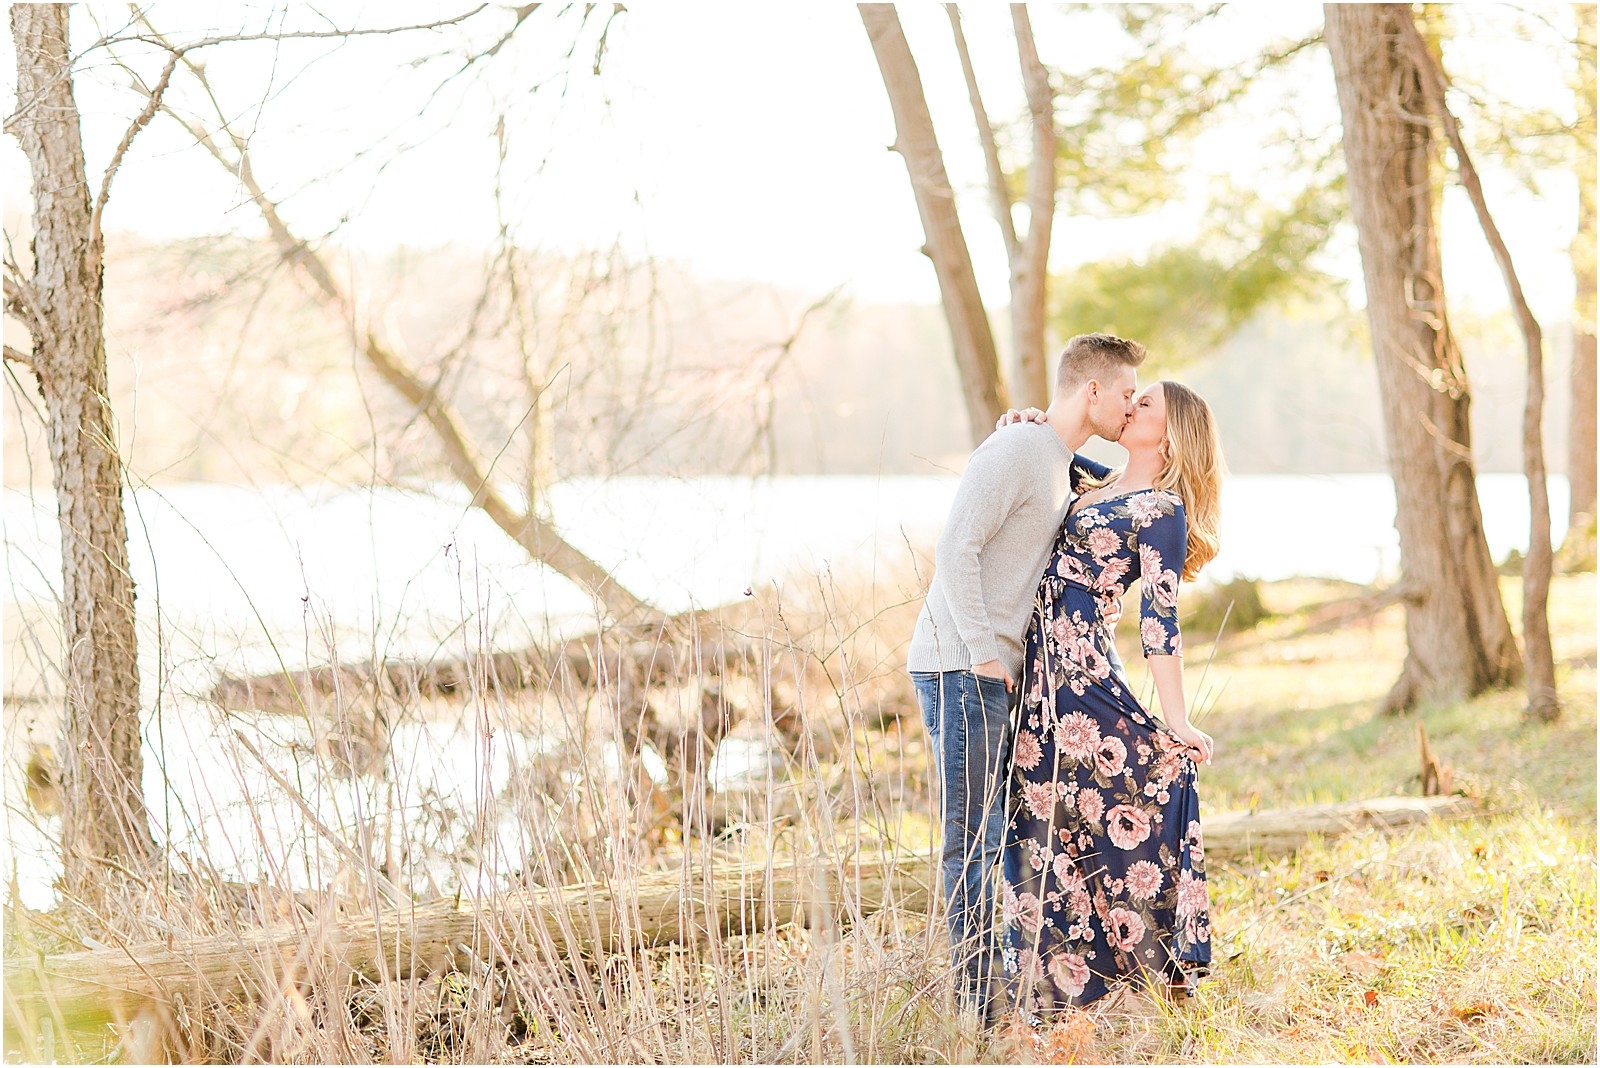 Rachel and Nick | Lincoln State Park Engagement Session 009.jpg